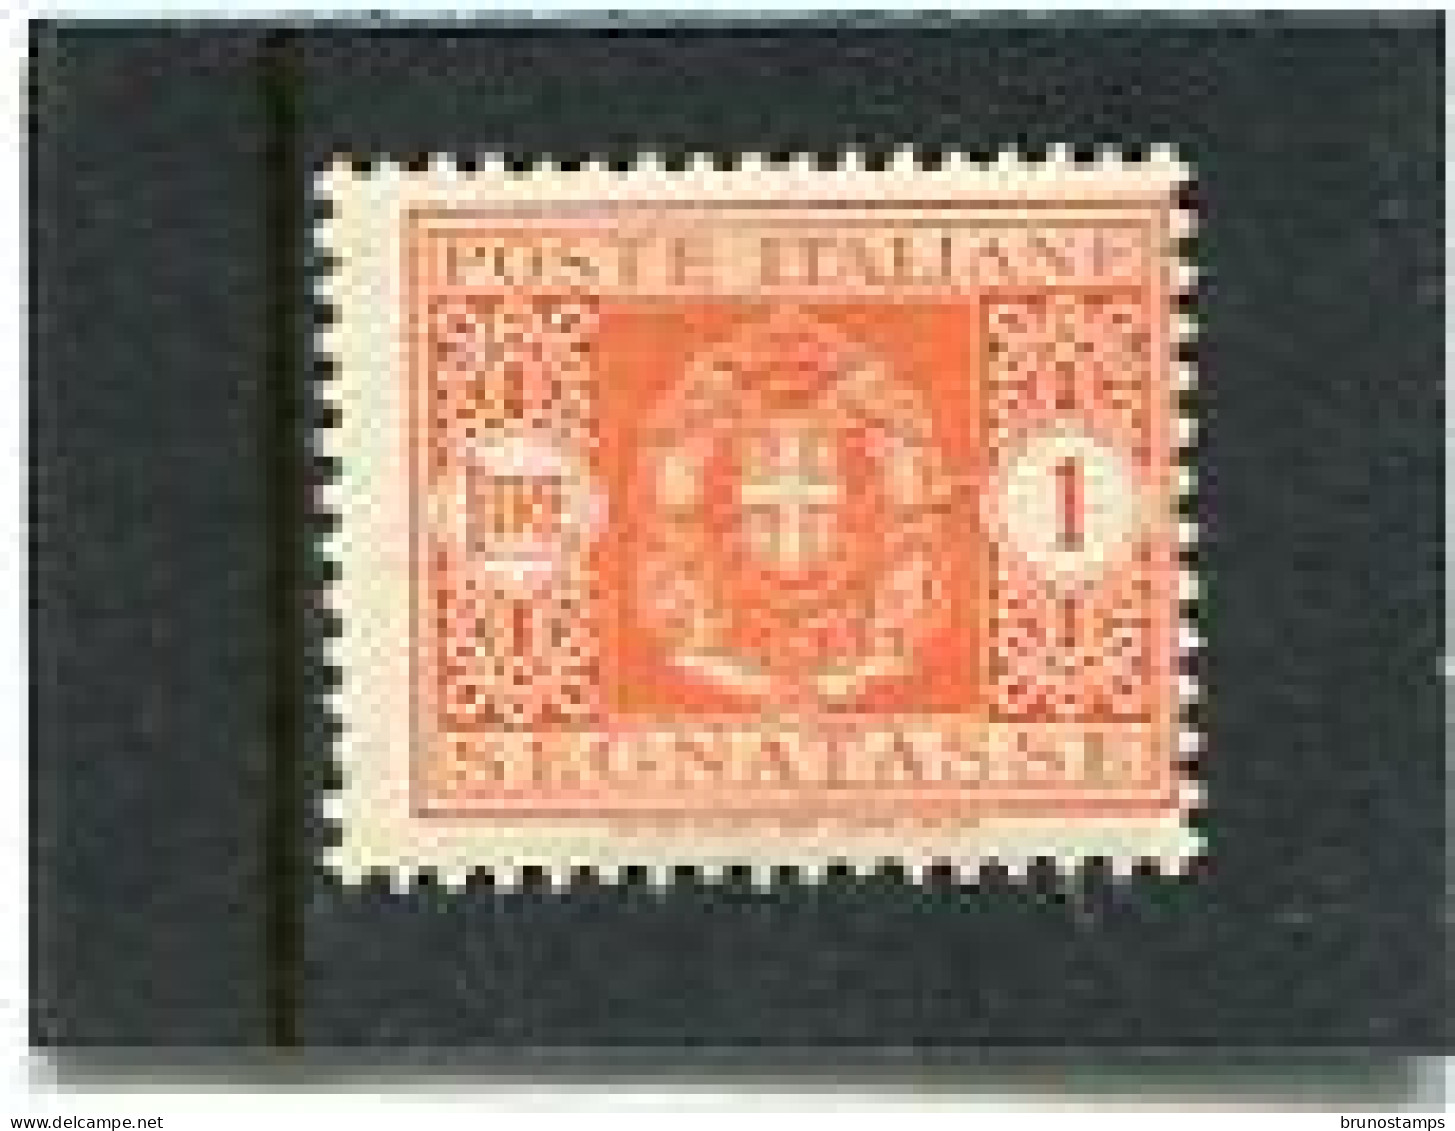 ITALY/ITALIA - 1934  POSTAGE DUE  1 L  MINT NH - Postage Due